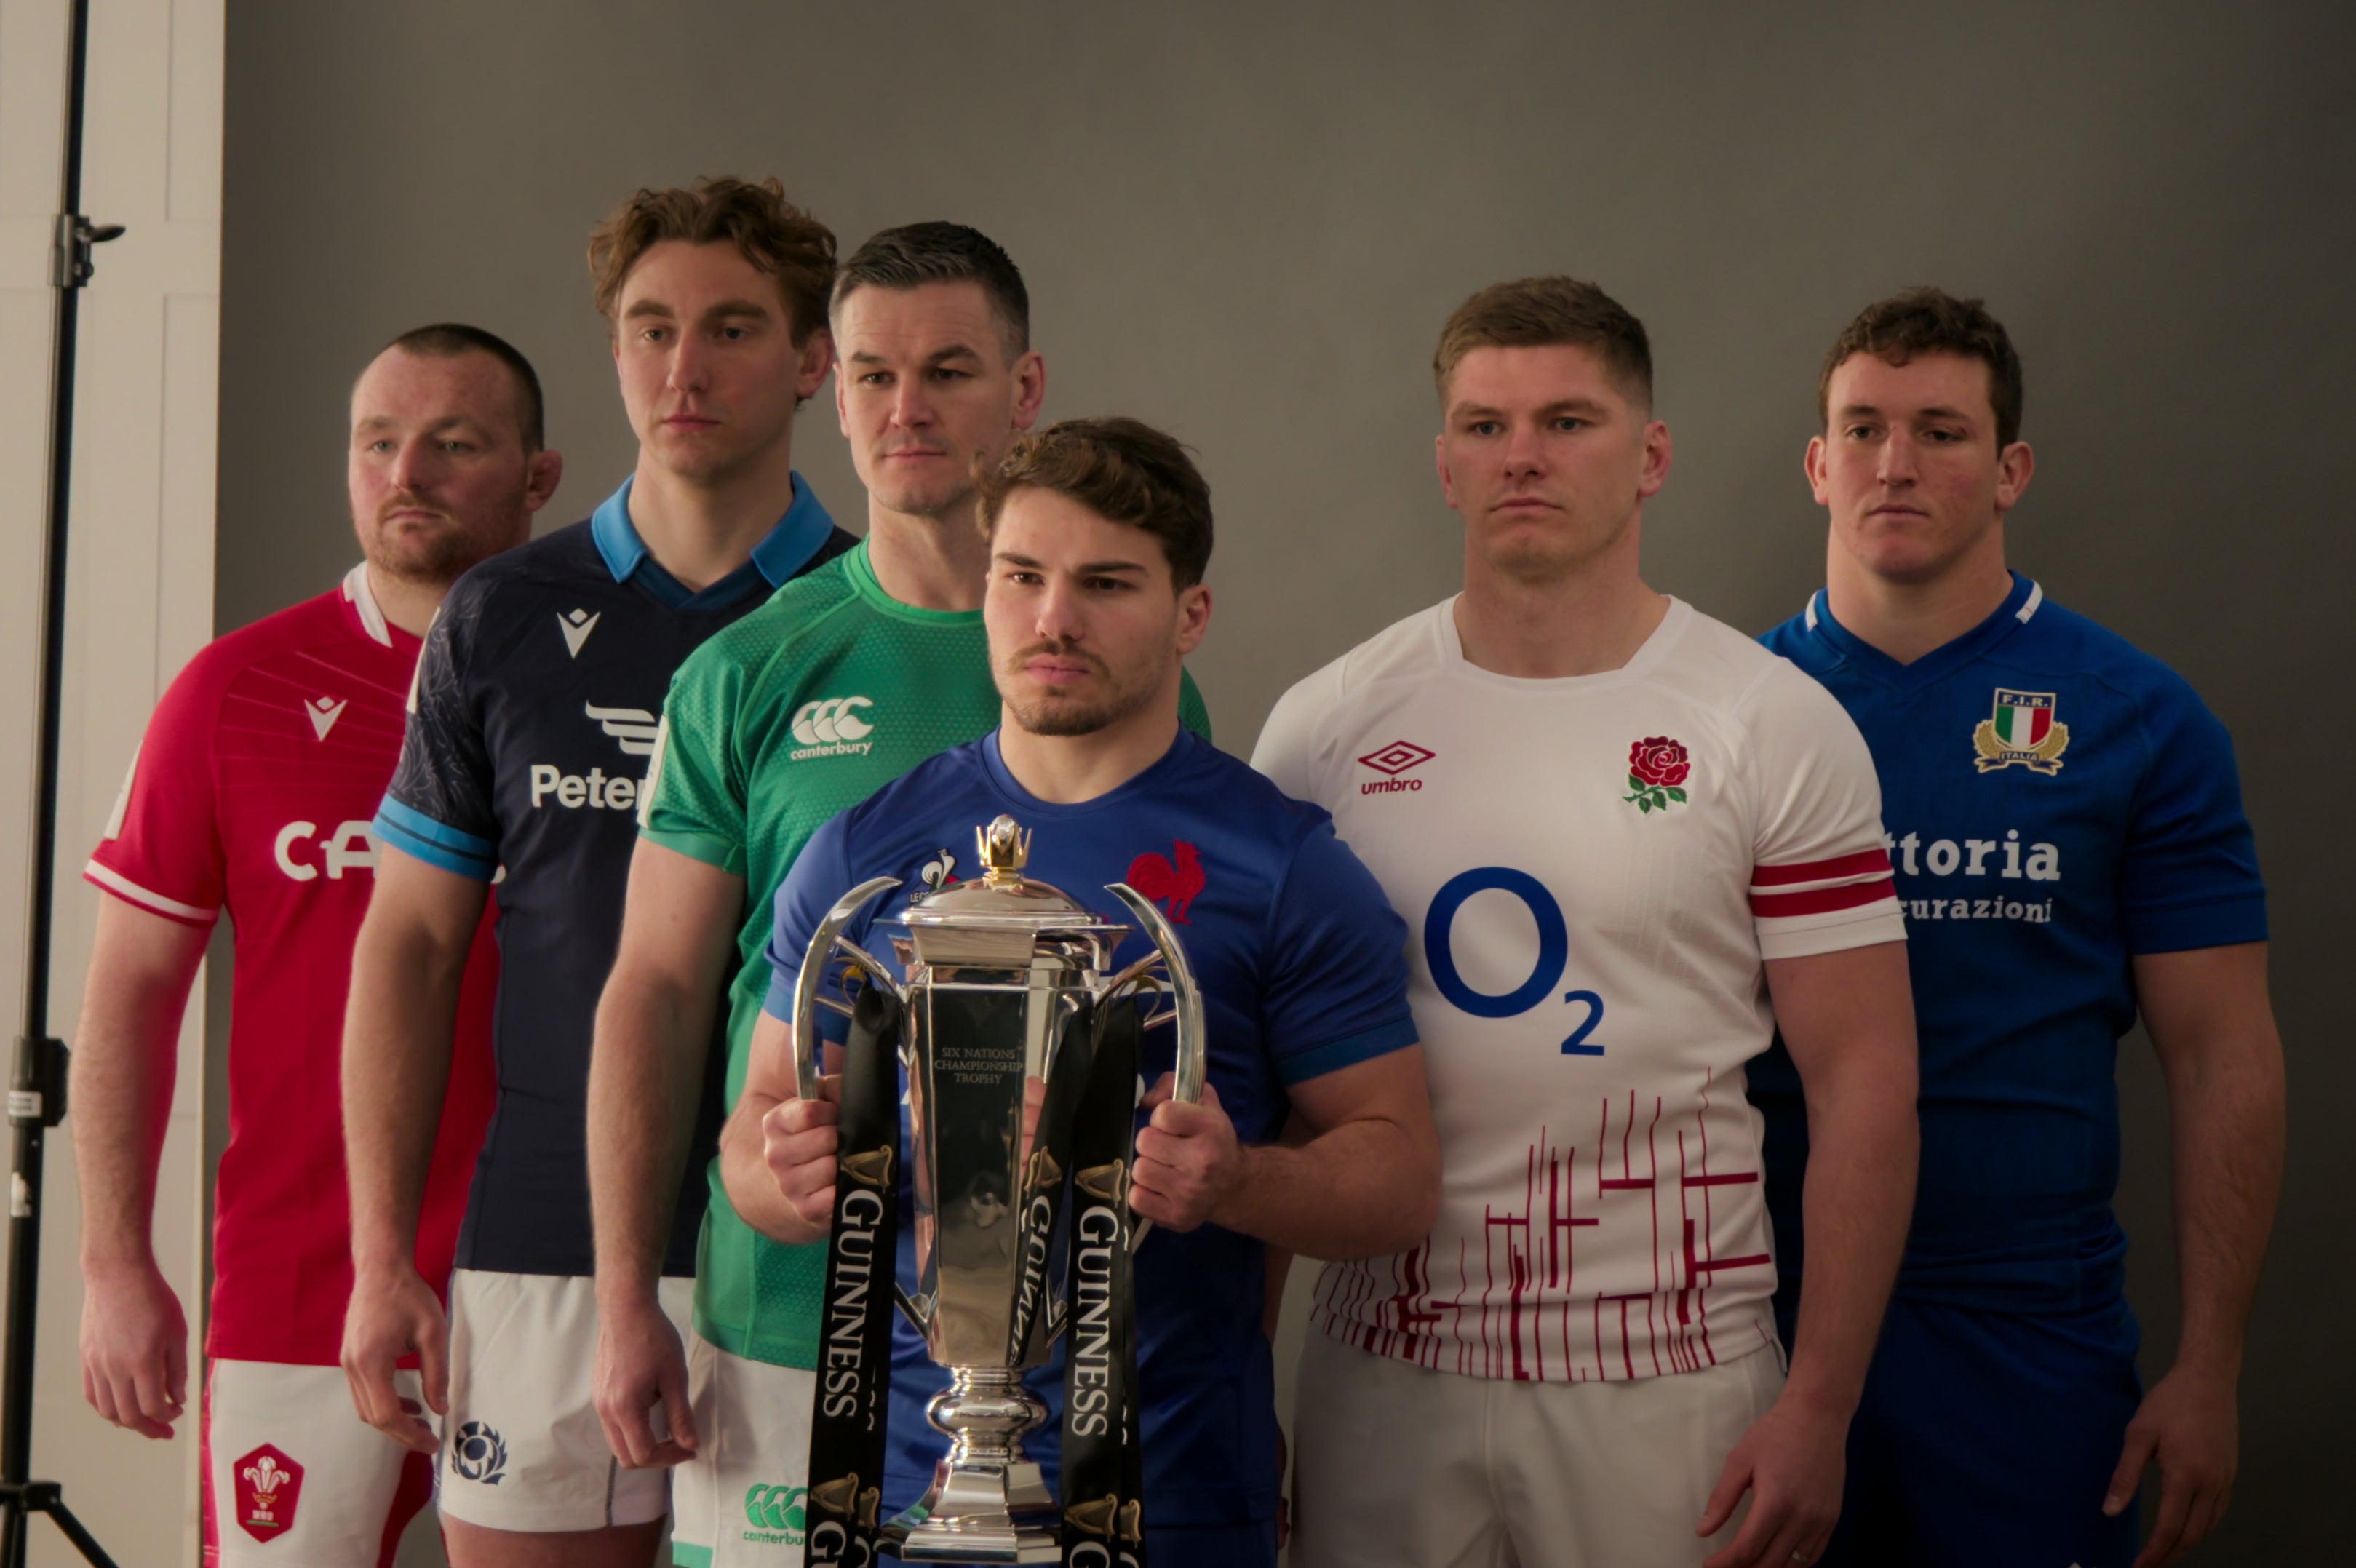 The 2023 Six Nations is chronicled in Netflix’s Full Contact series